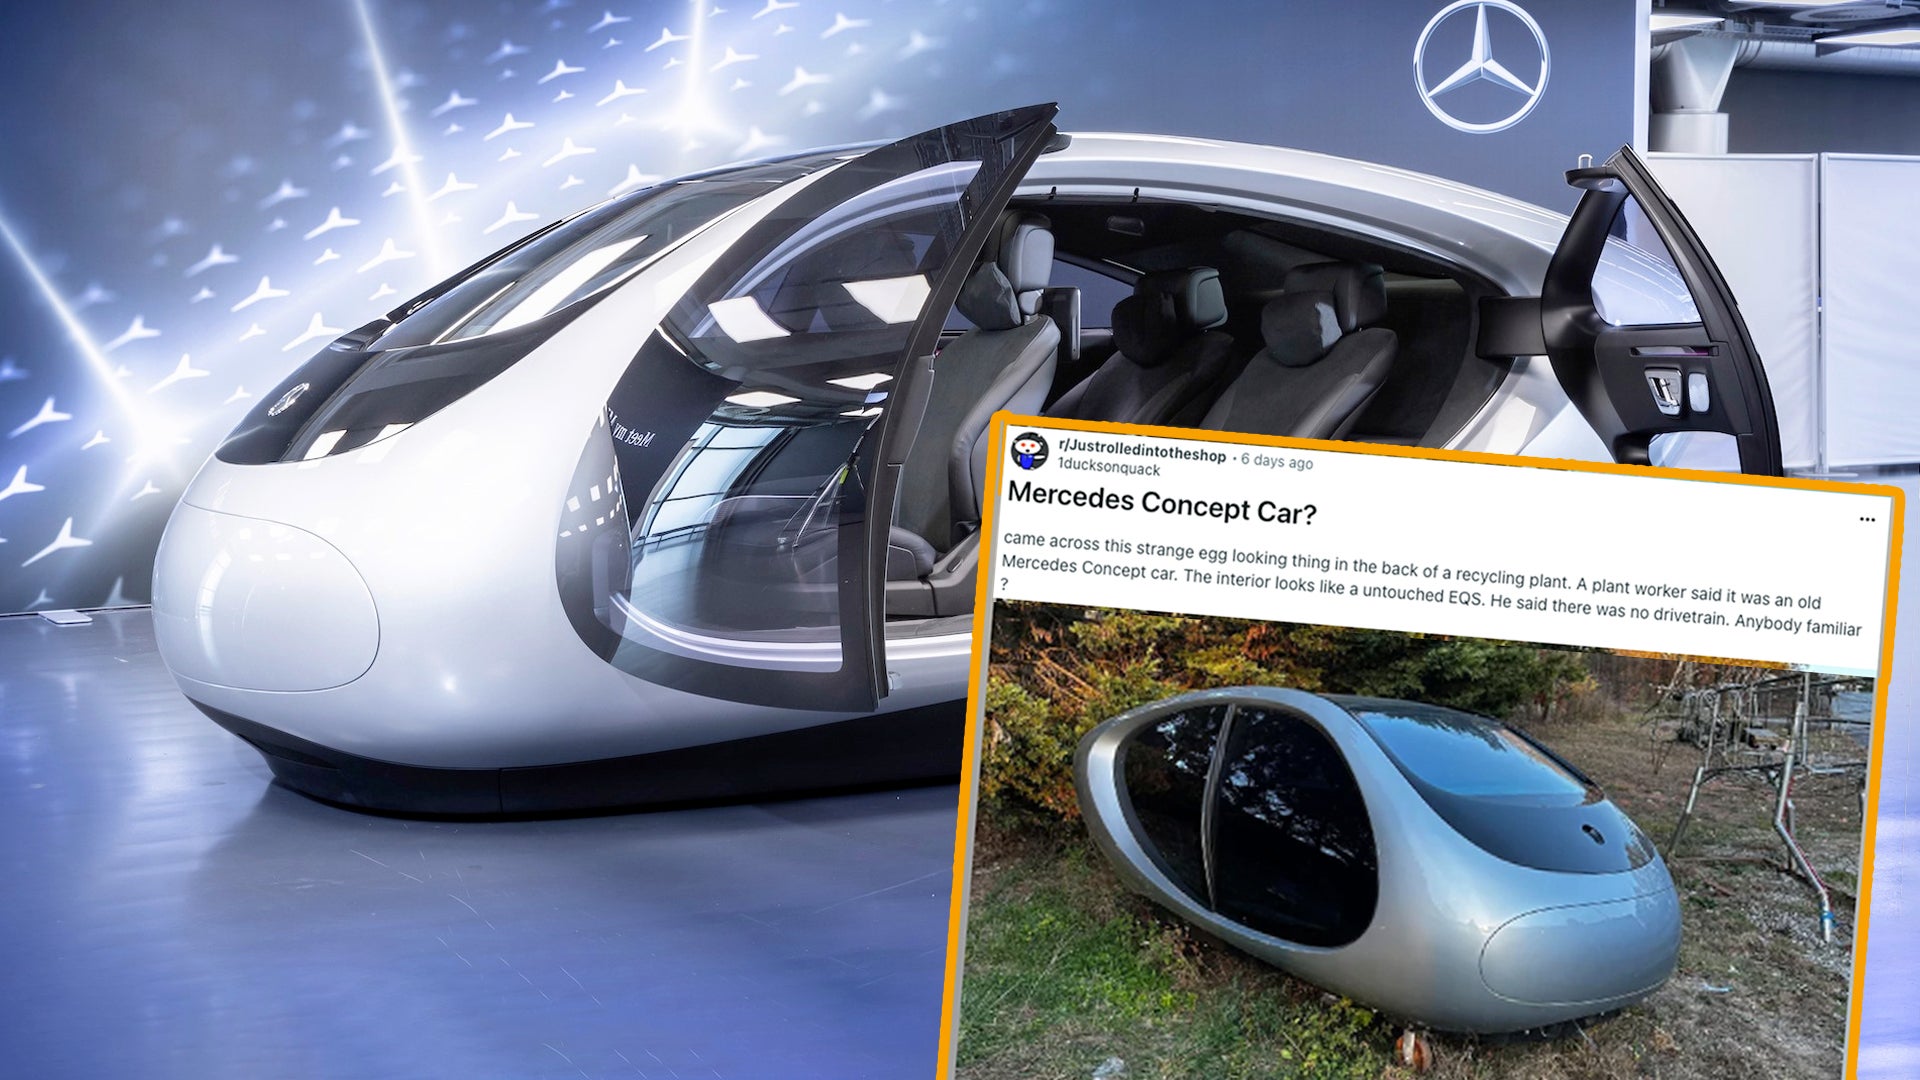 Who is going to save the deserted Mercedes Techno-Egg concept?